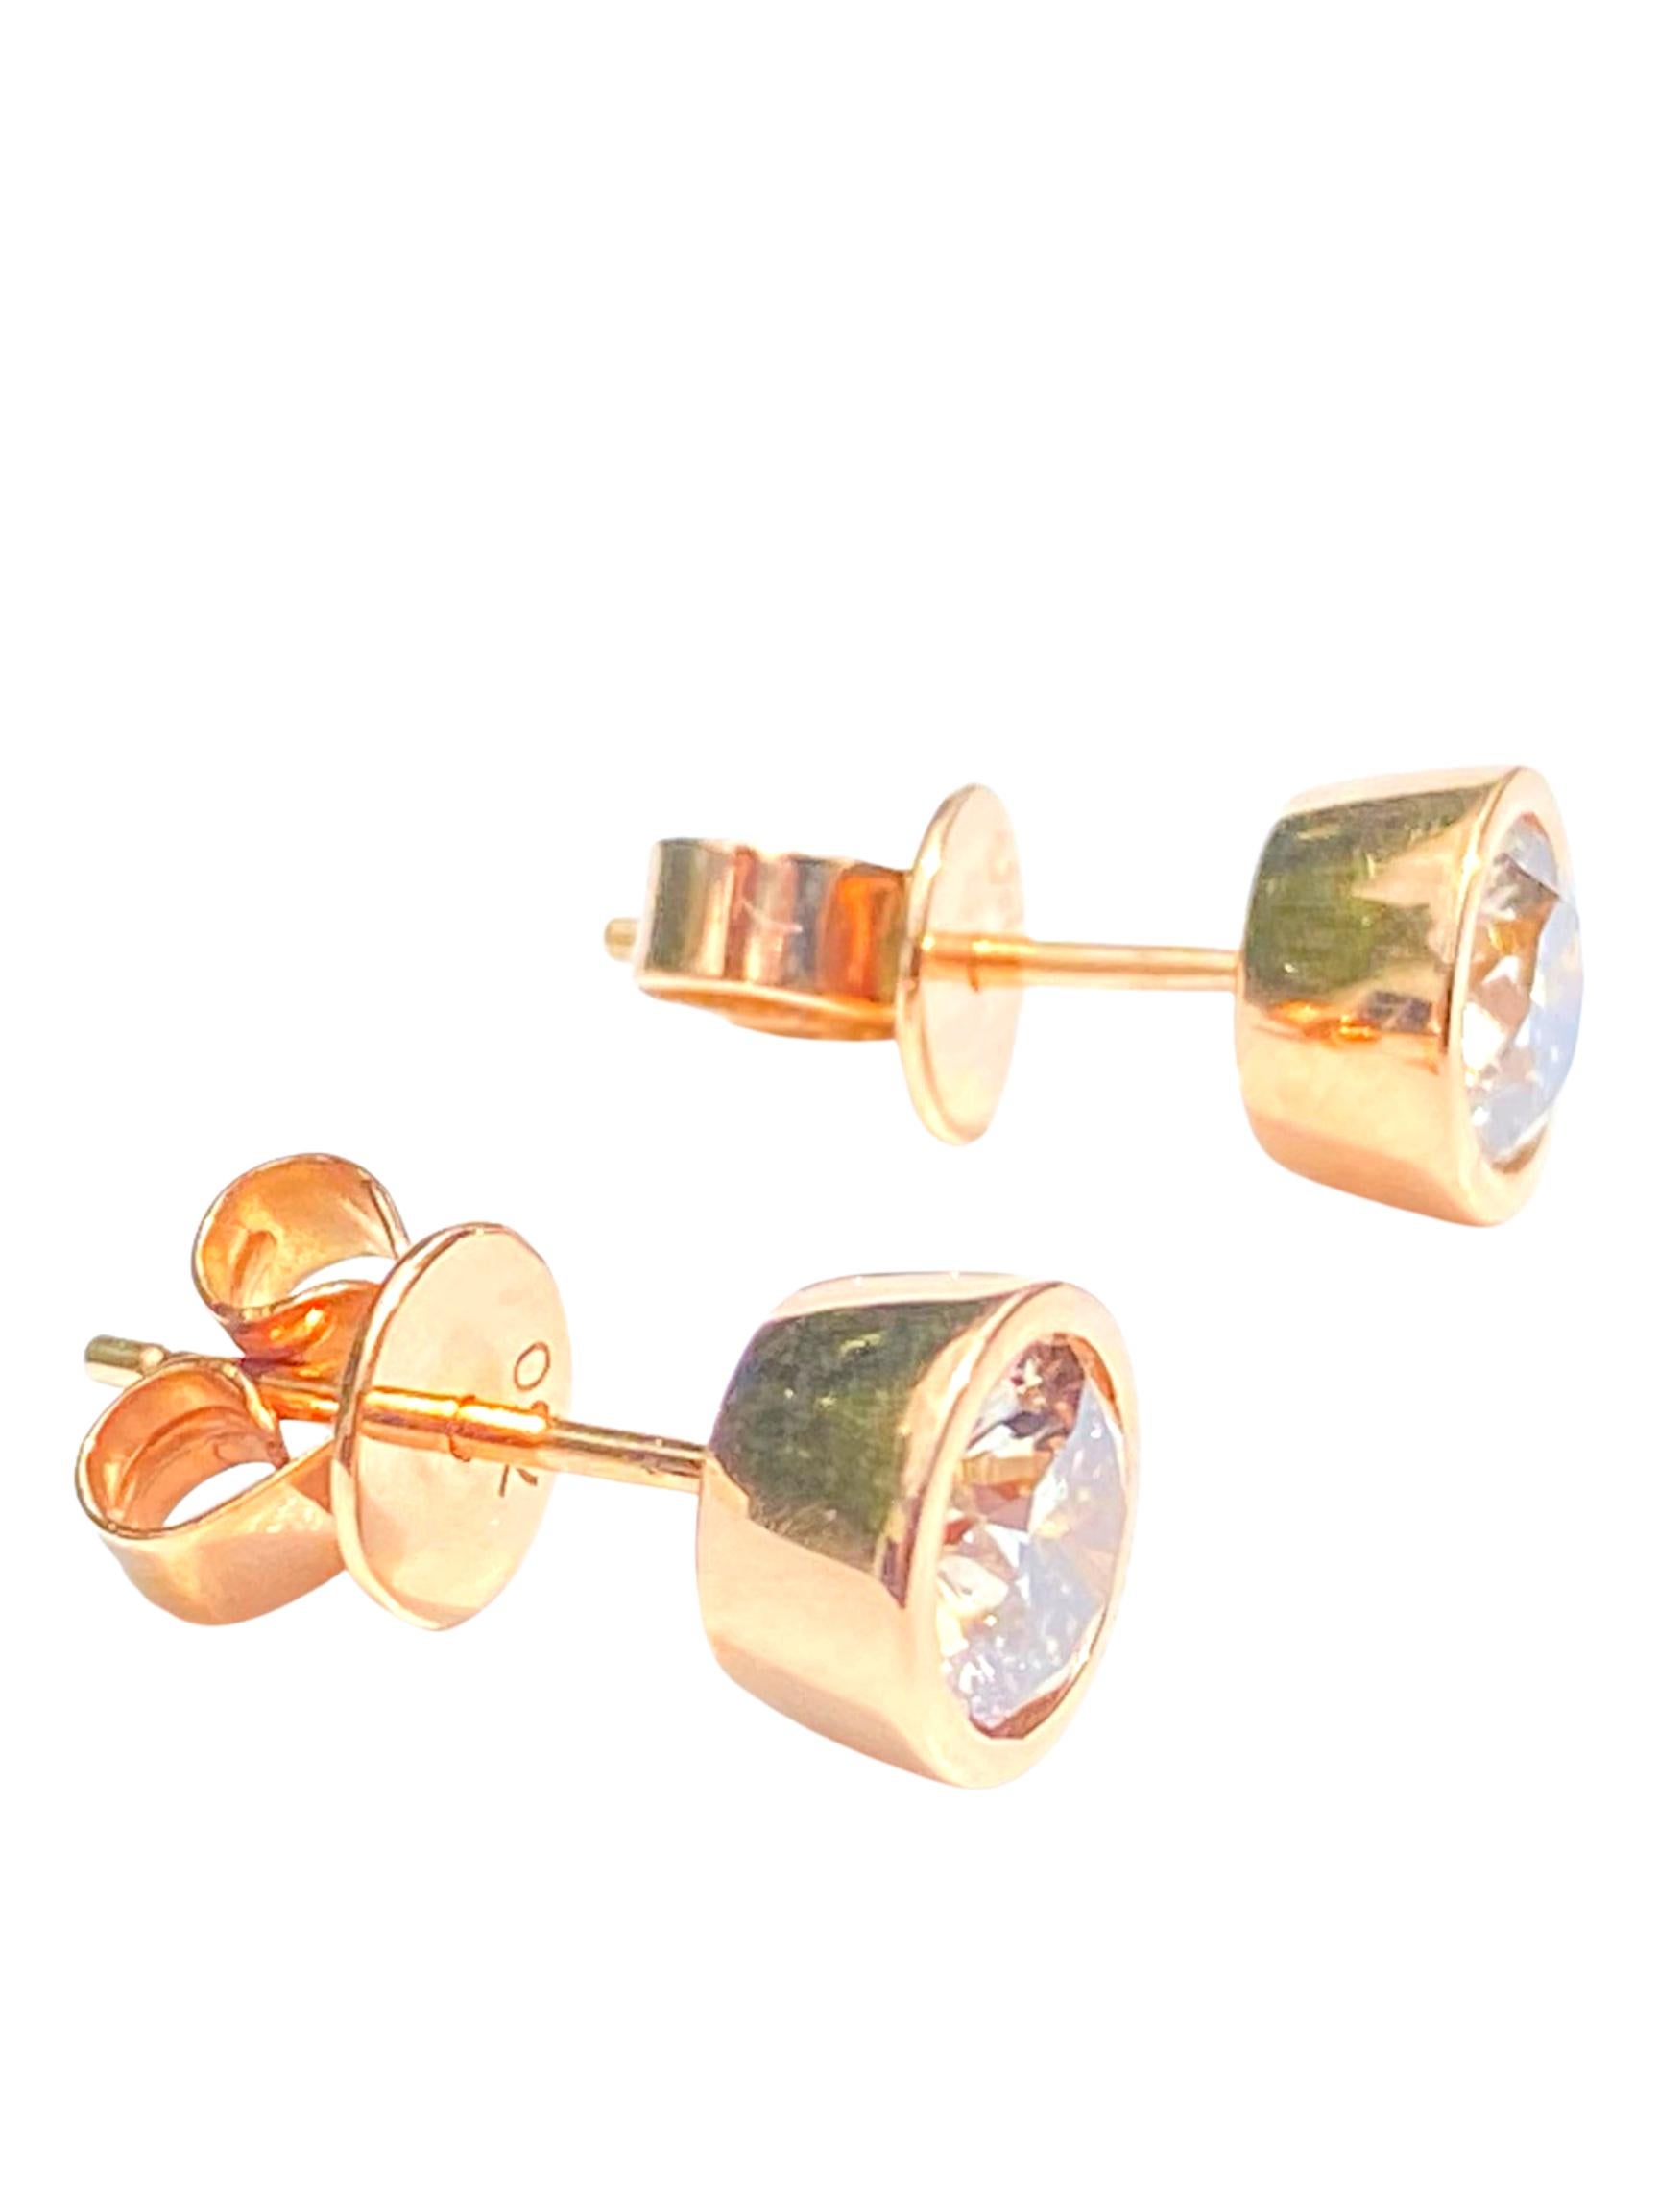 1.58 Carat Diamond and 18k Rose Gold Stud Earrings Round-Brilliant Cut Diamonds In New Condition For Sale In Miami, FL